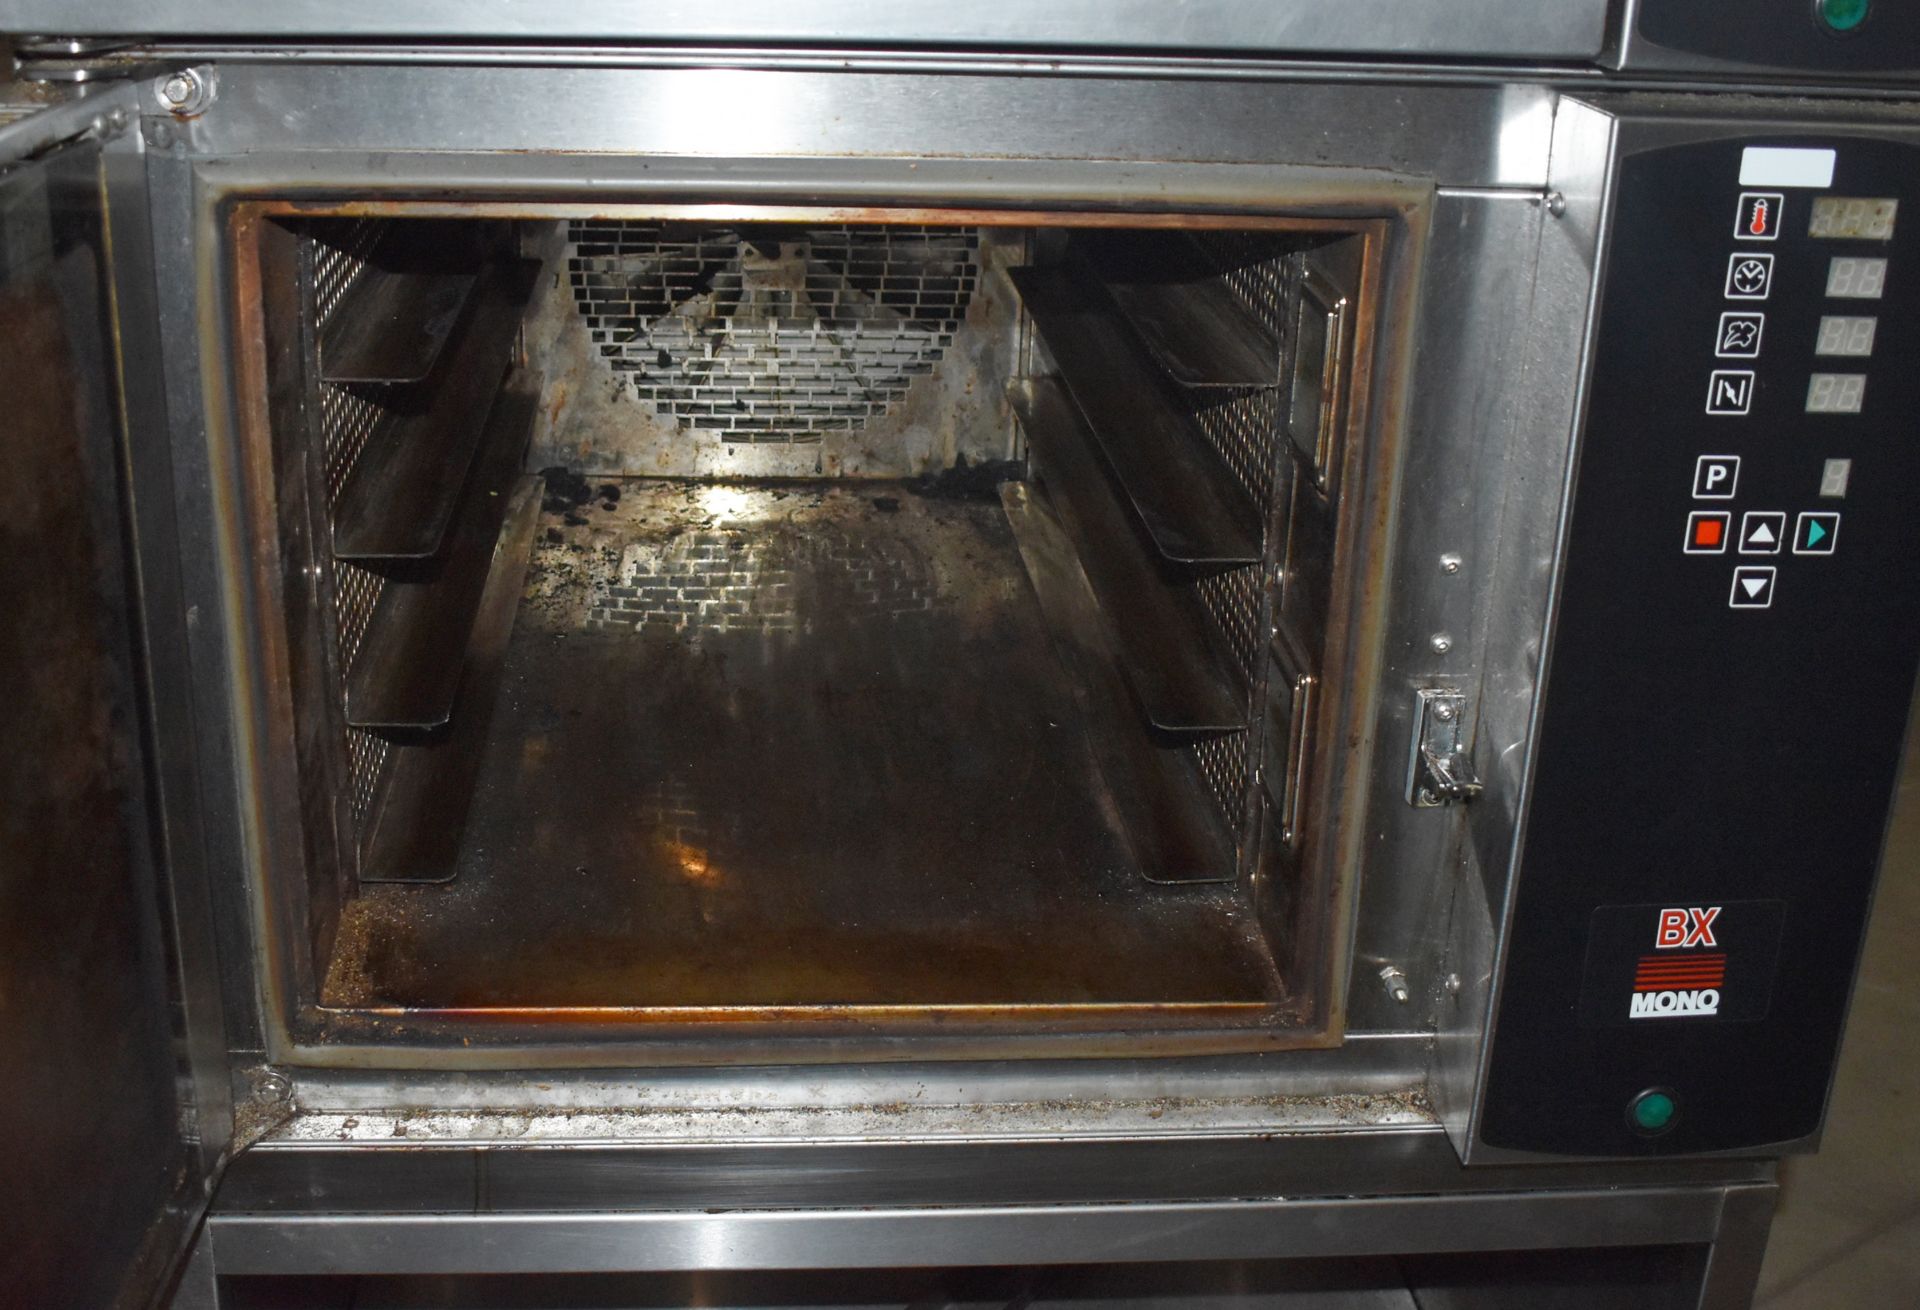 1 x Mono Double Classic and Steam BX Convection Oven - Model FG159C - 3 Phase Power - H210 x W83 x - Image 5 of 15